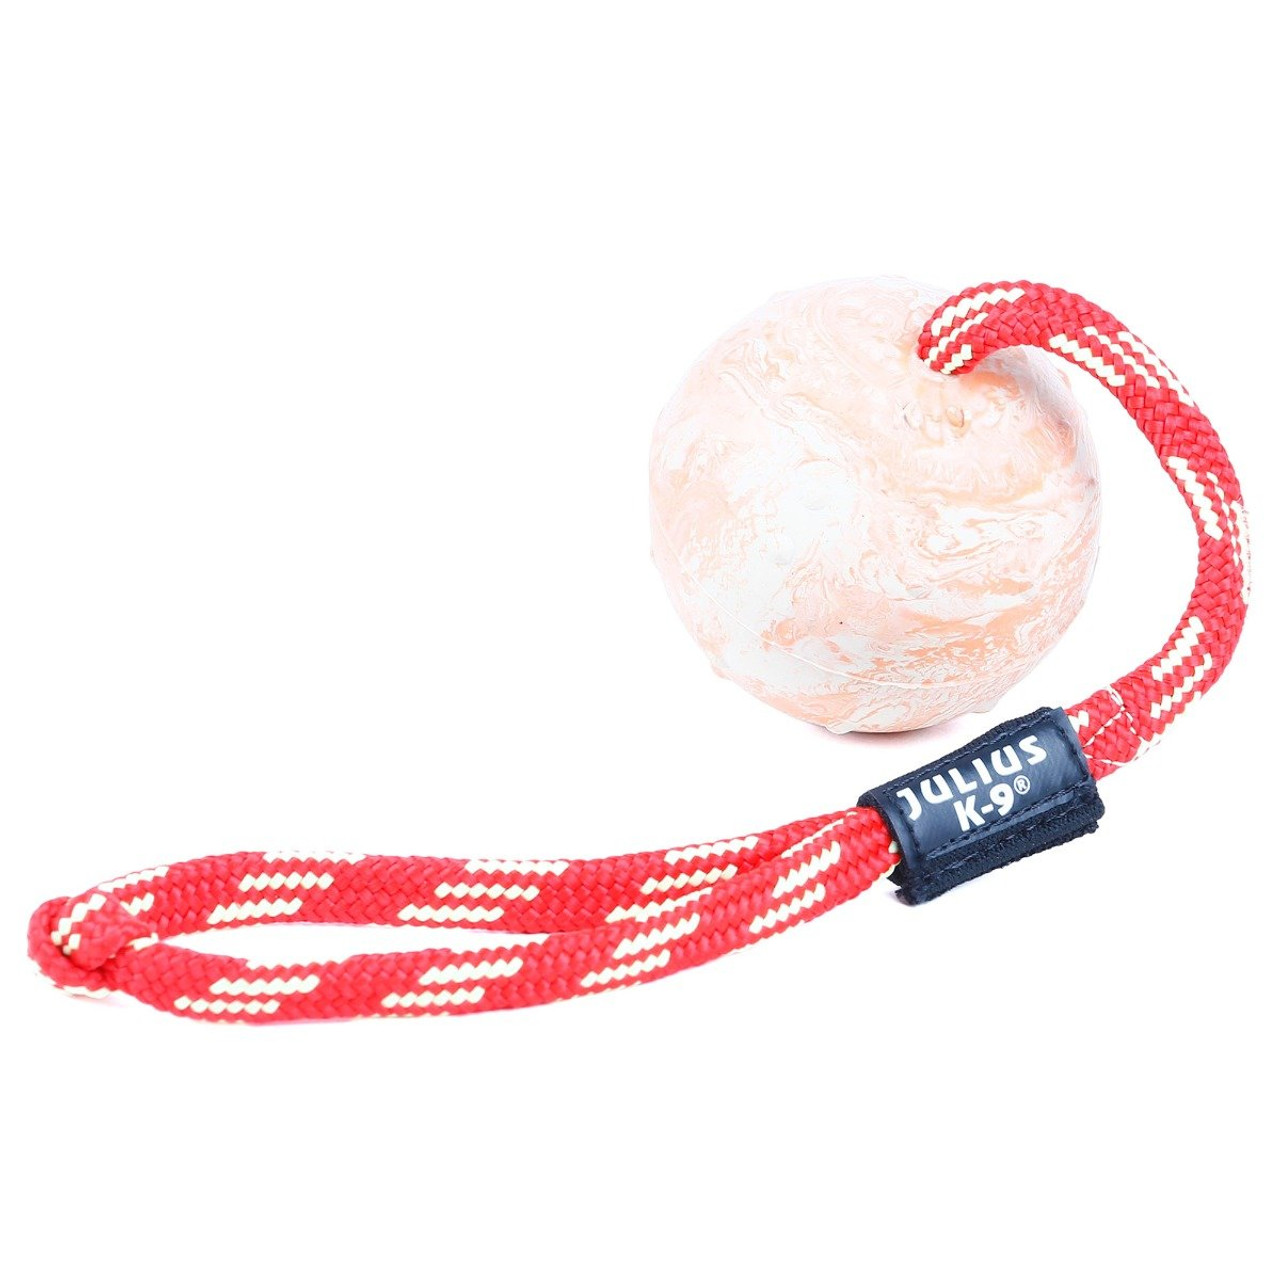 K9 Ball with Rope-Activity Dog Toy [TT1##1081 2 1/3 inch (6 cm) Dog training  Ball solid] : Dog Harnesses, Collars, Leashes, Muzzles, Breed Information  and Pictures